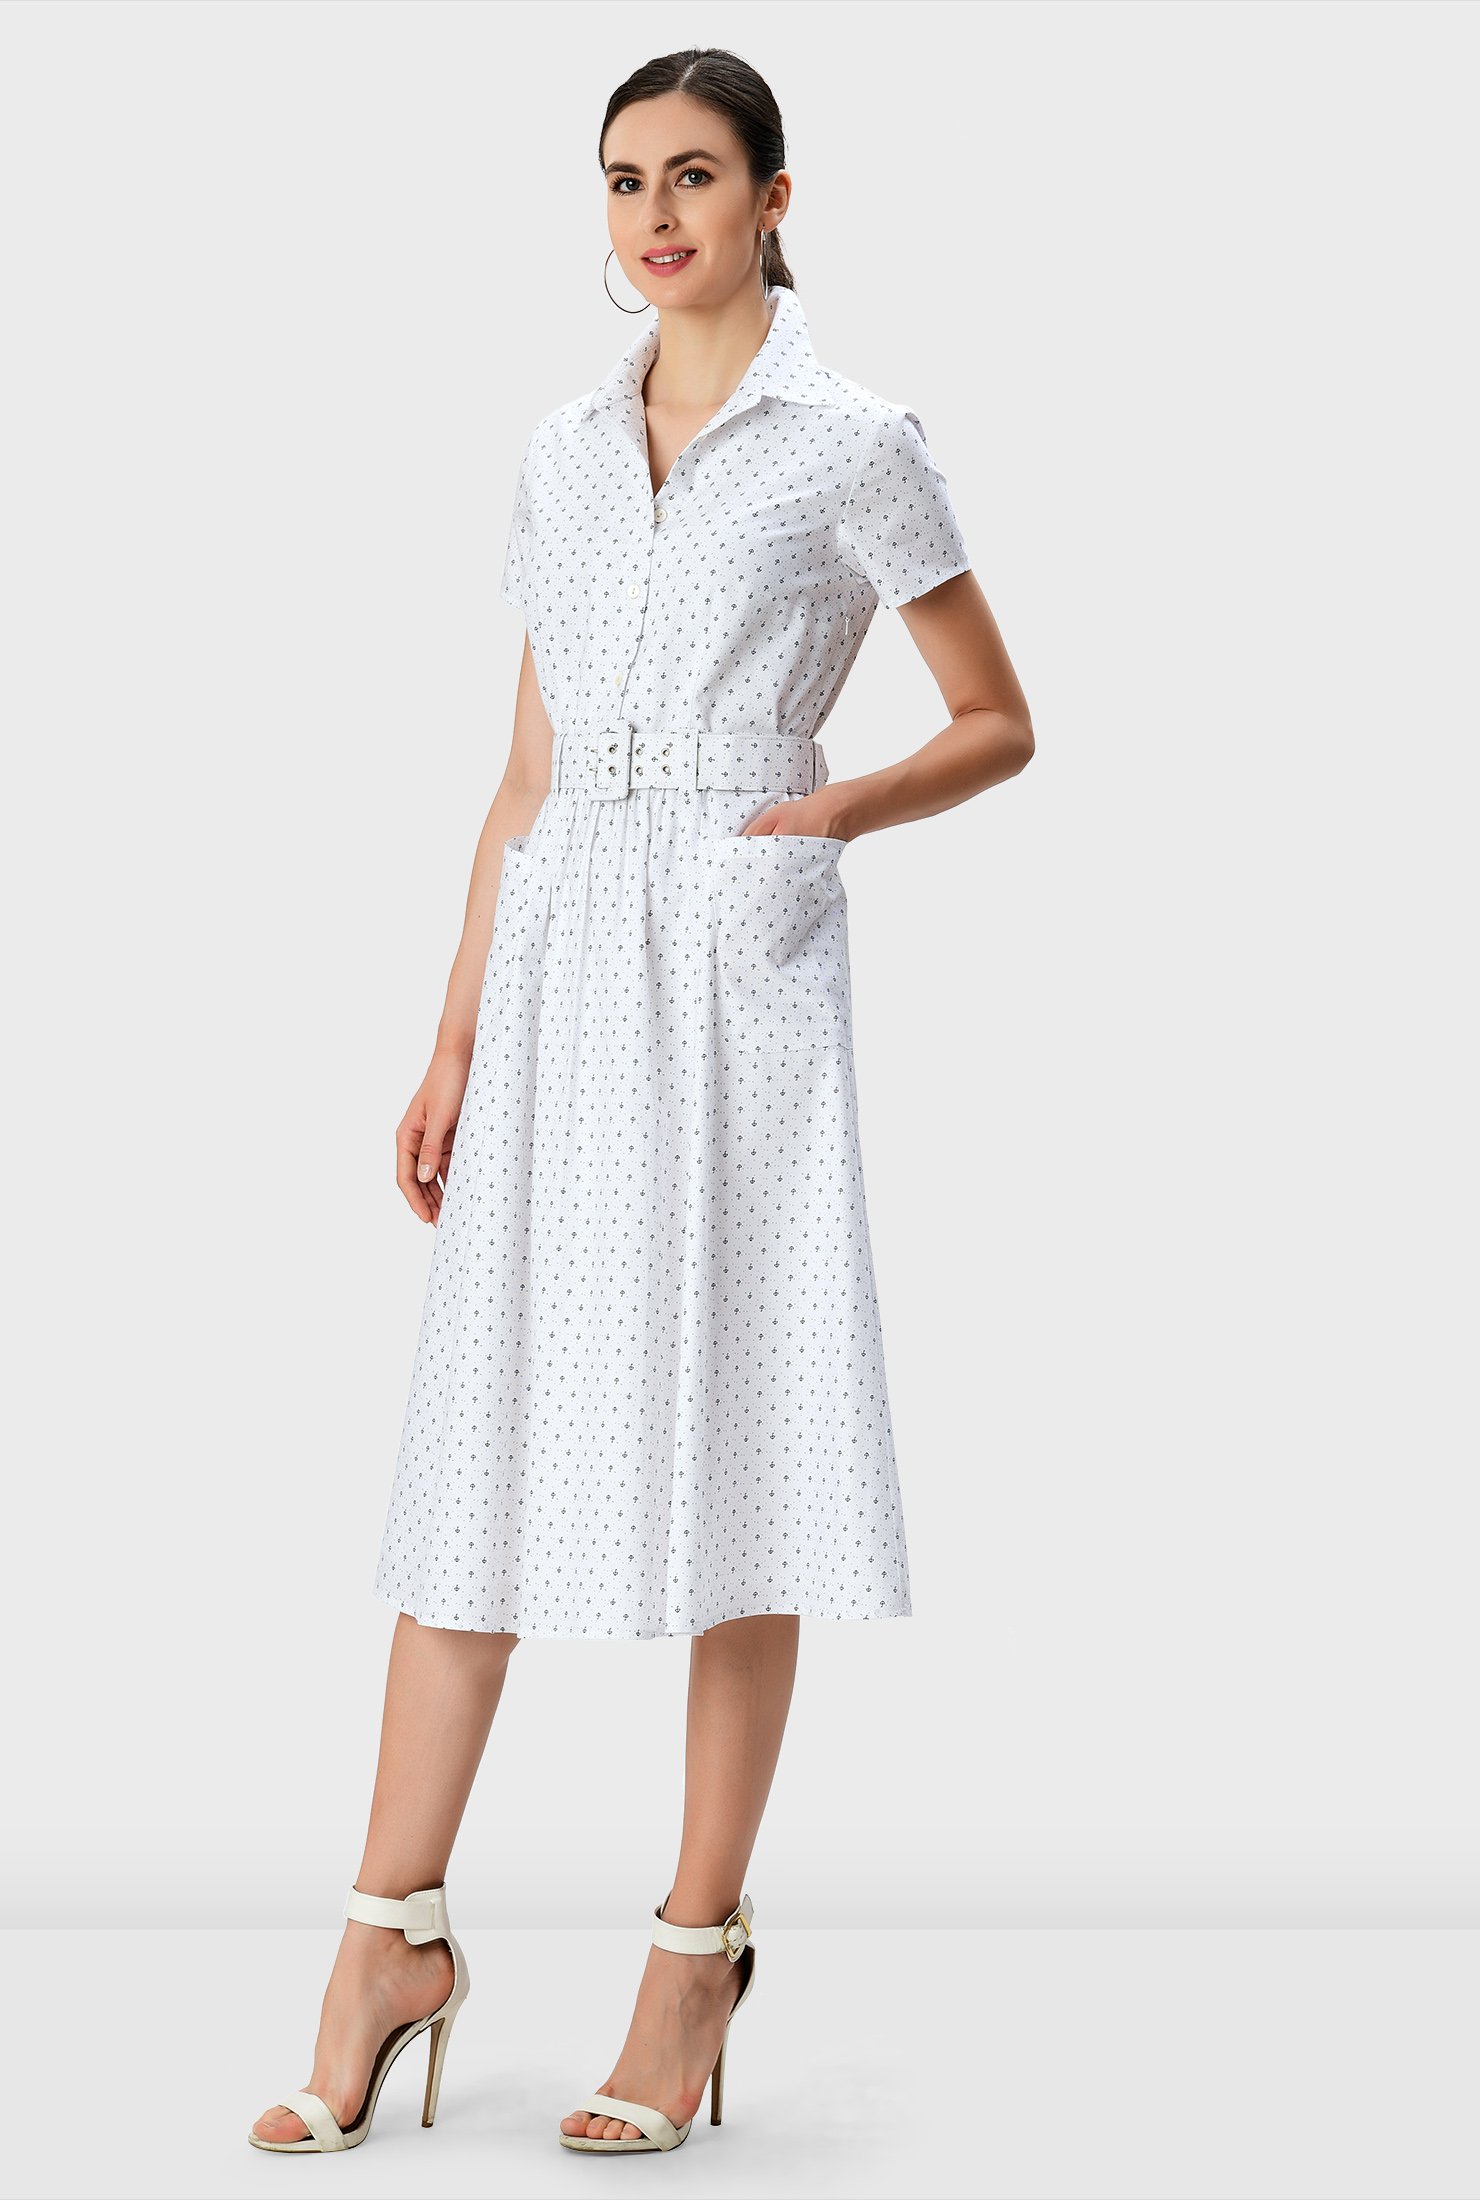 The best kind of dress for everyday wear, our button-down shirtdress made of crisp cotton poplin is ready for work, weekend and everything in between.